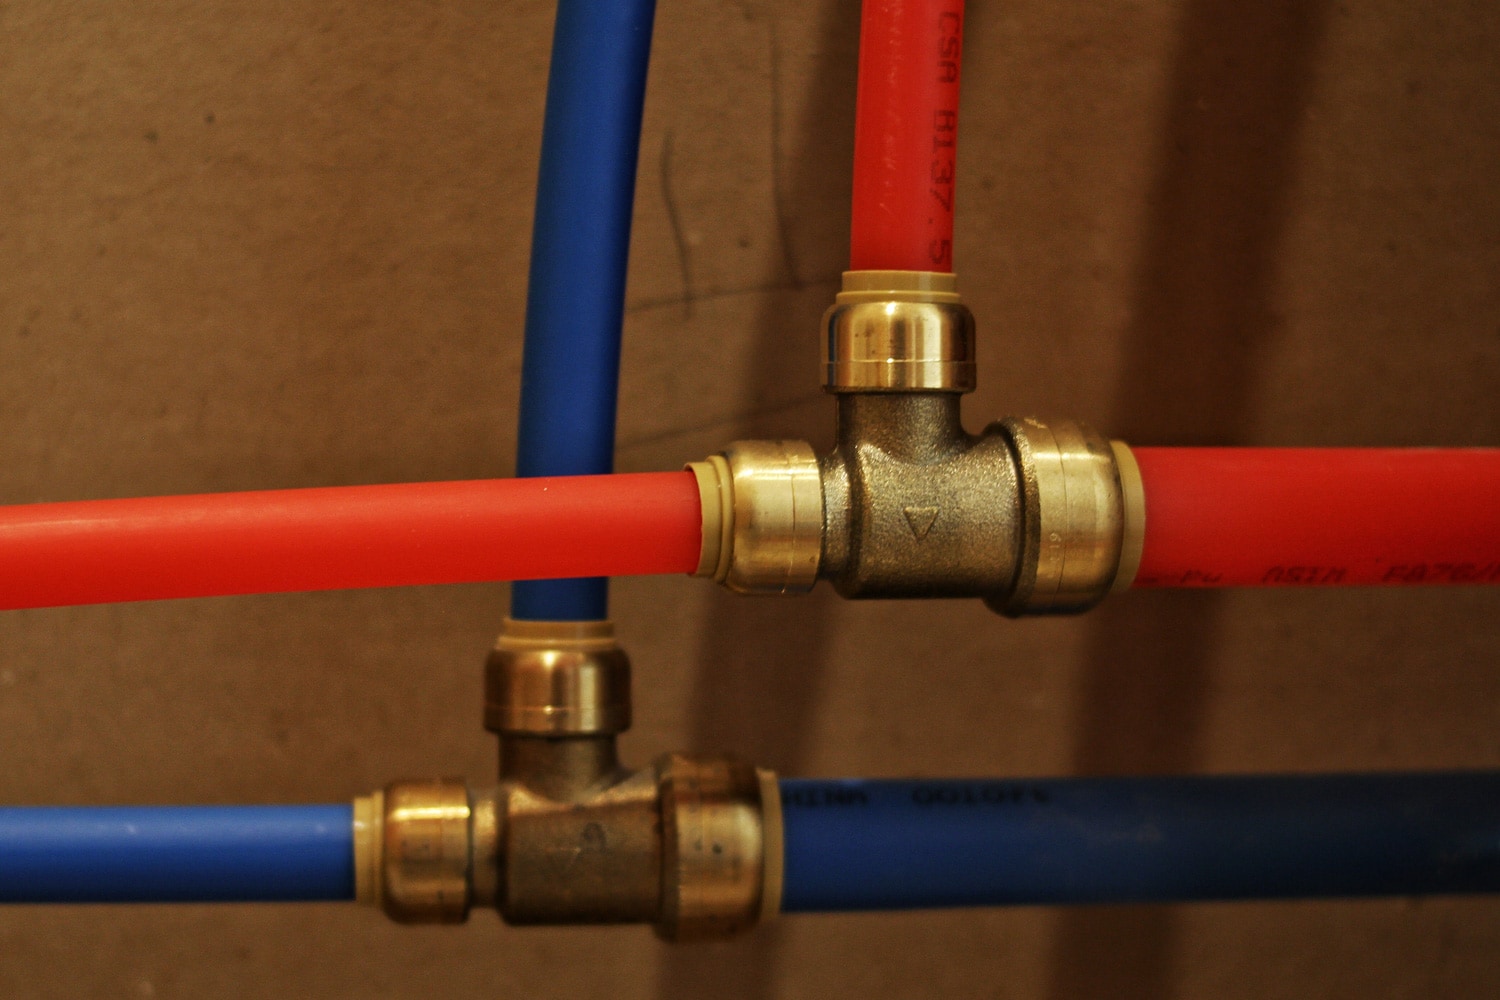 Sharkbite fittings with red and blue PEX pipe.